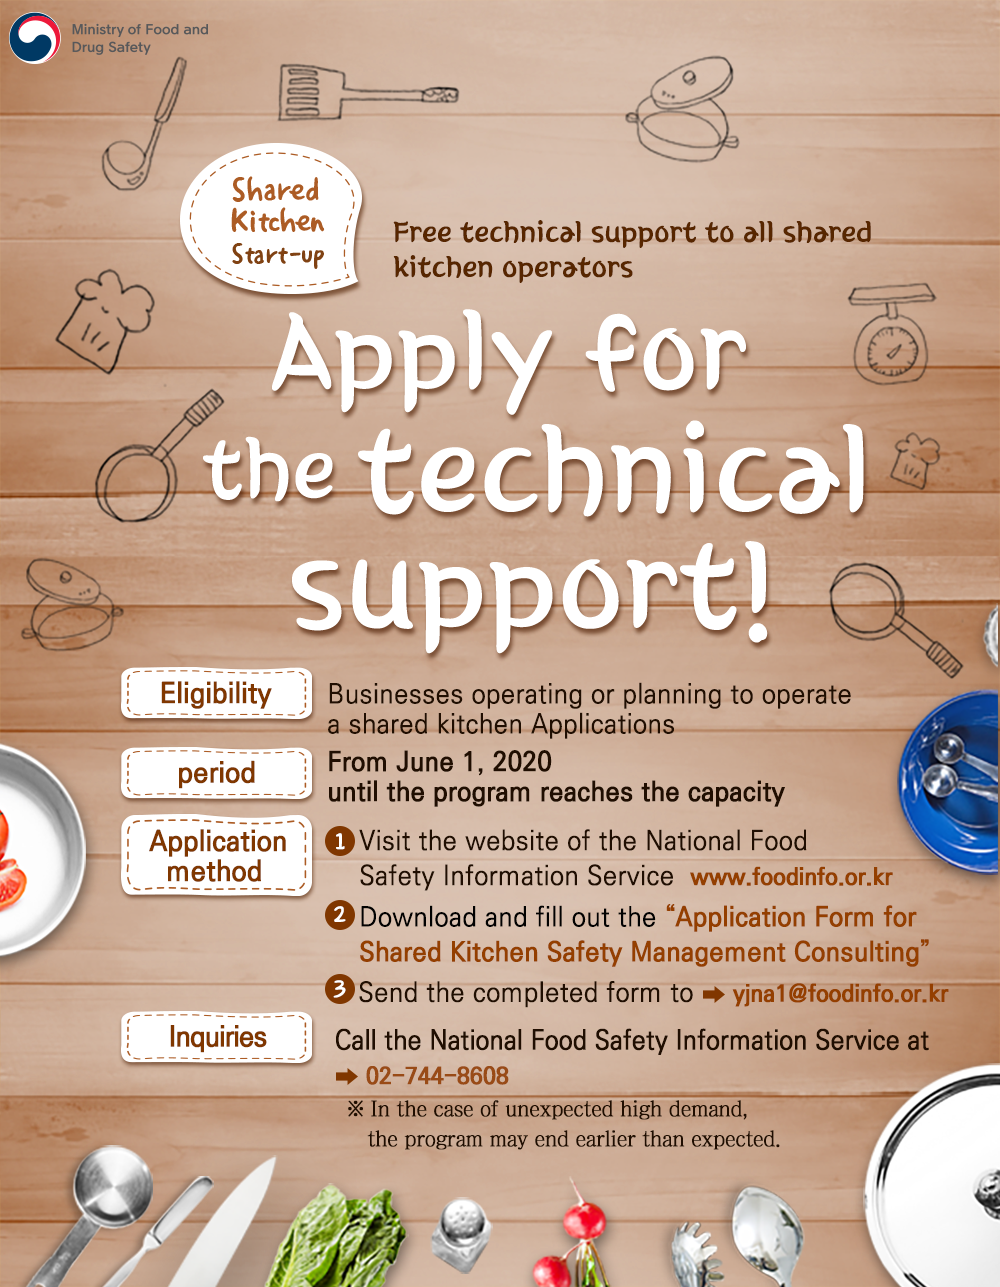 Free technical support to all shared kitchen operators